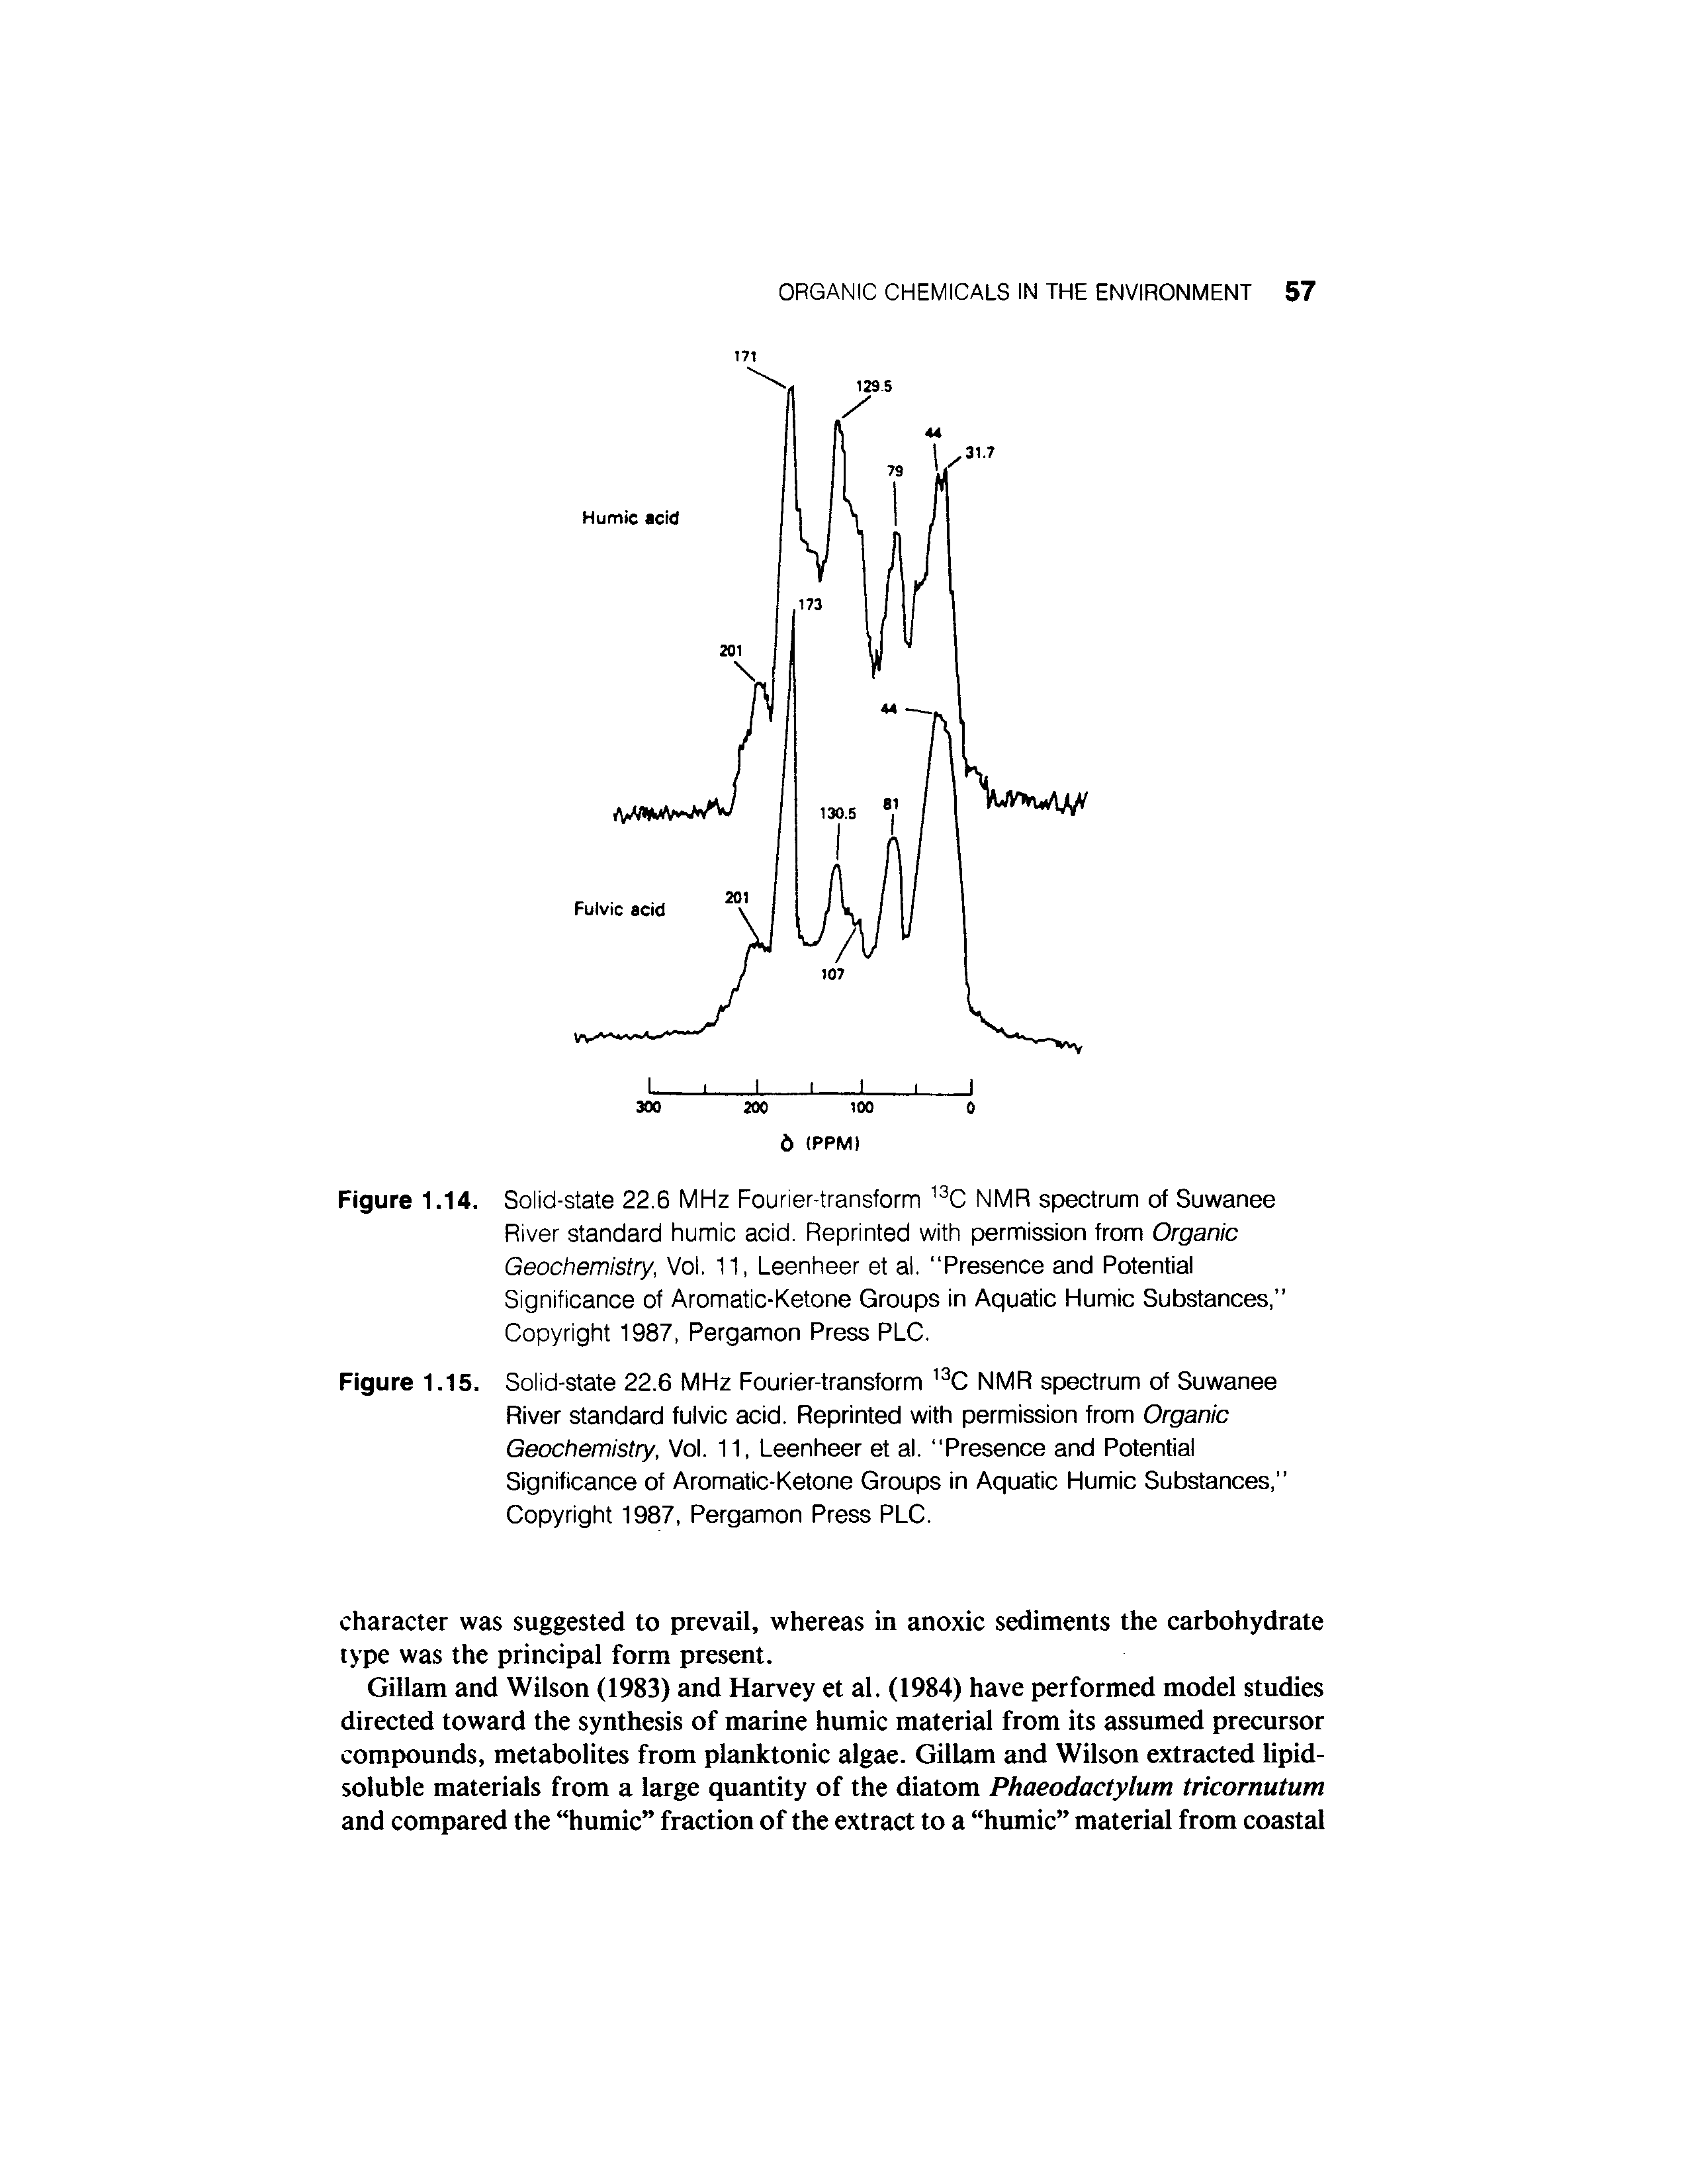 Figure 1.15. Soiid-state 22.6 MHz Fourier-transform NMR spectrum of Suwanee River standard fulvic acid. Reprinted with permission from Organic Geochemistry, Vol. 11, Leenheer et al. Presence and Potential Significance of Aromatic-Ketone Groups in Aquatic Humic Substances, Copyright 1987, Pergamon Press PLC.